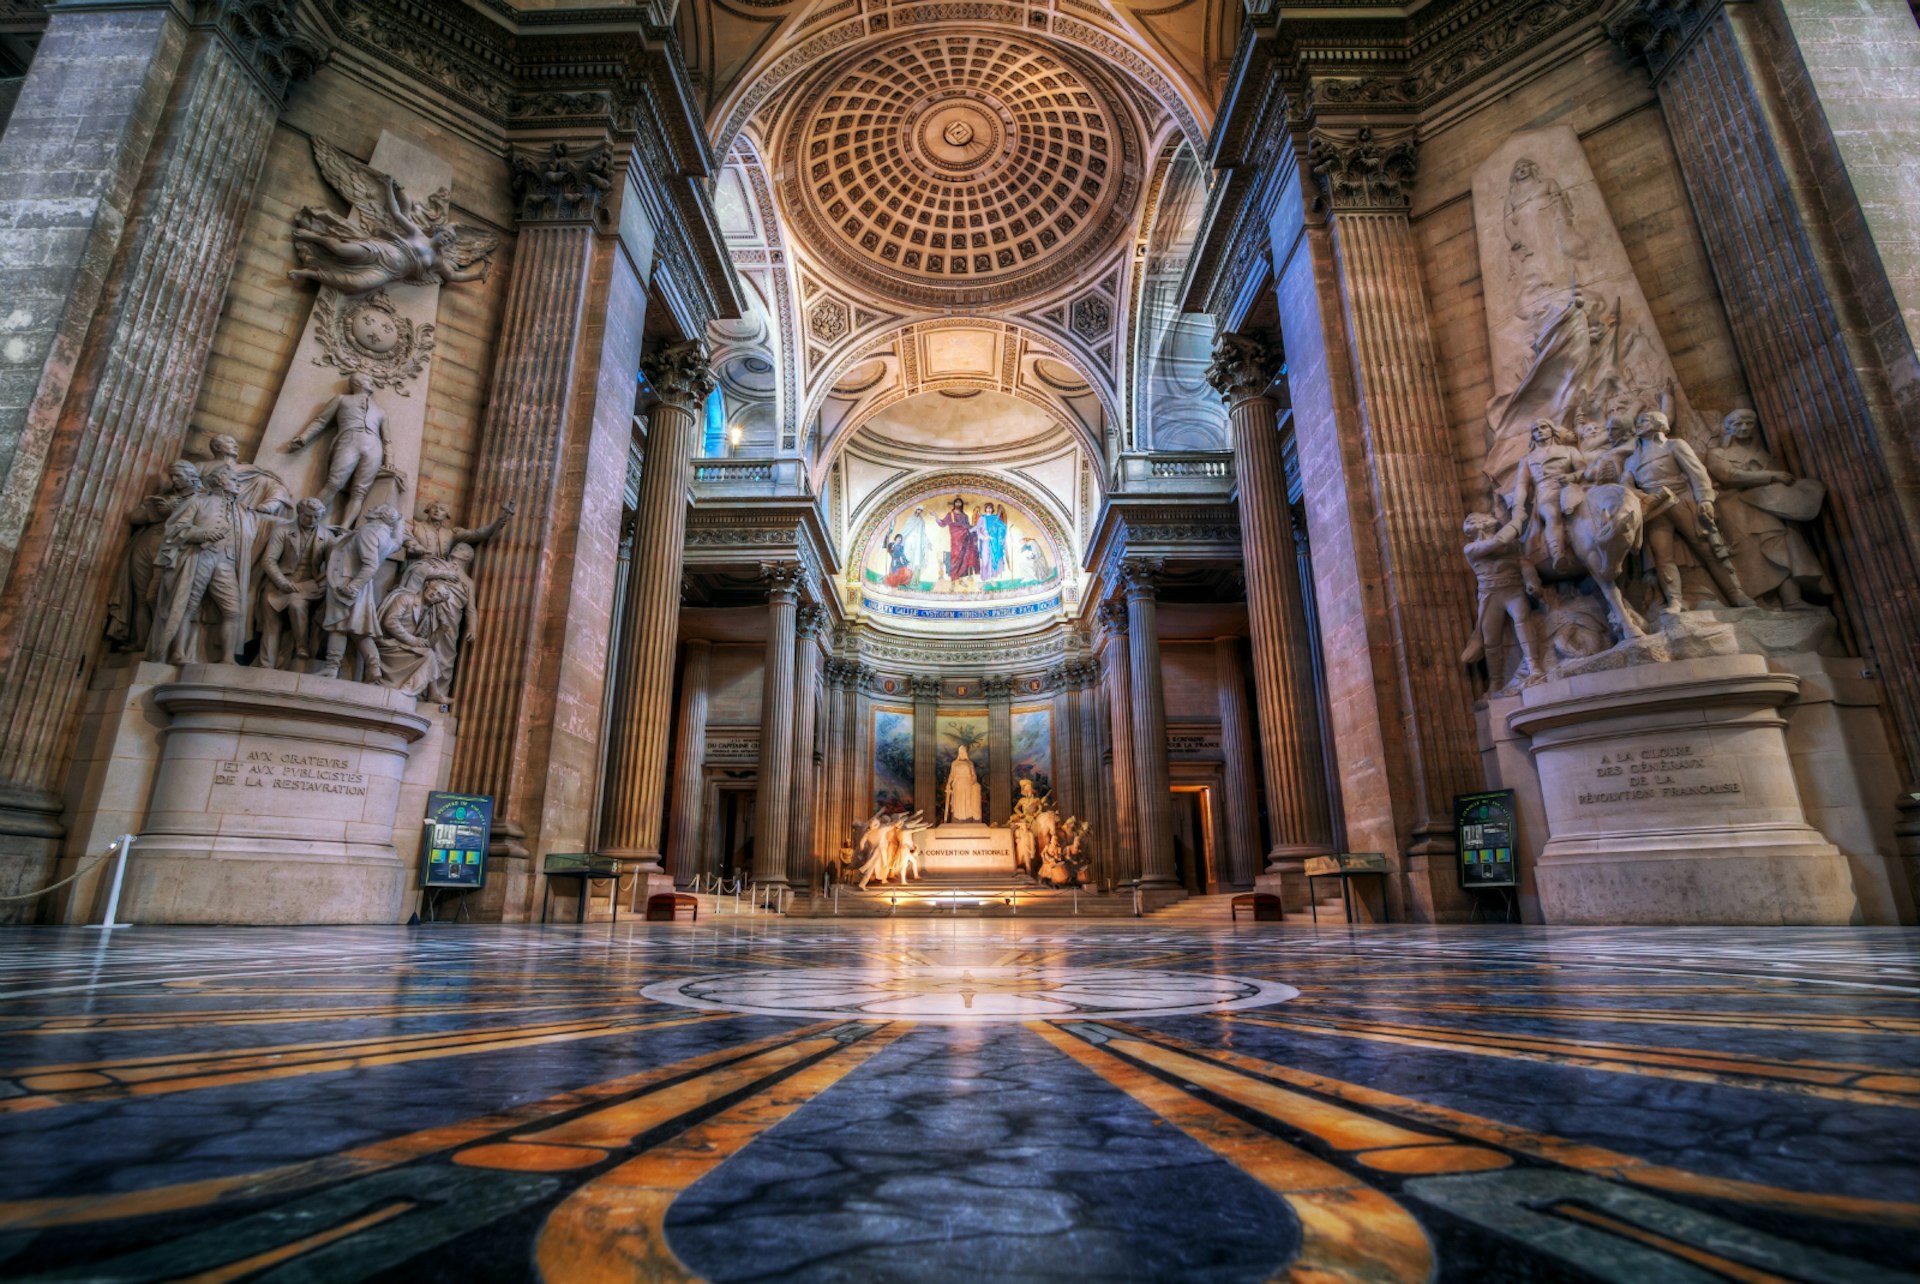 The inside of the Panthéon in Paris